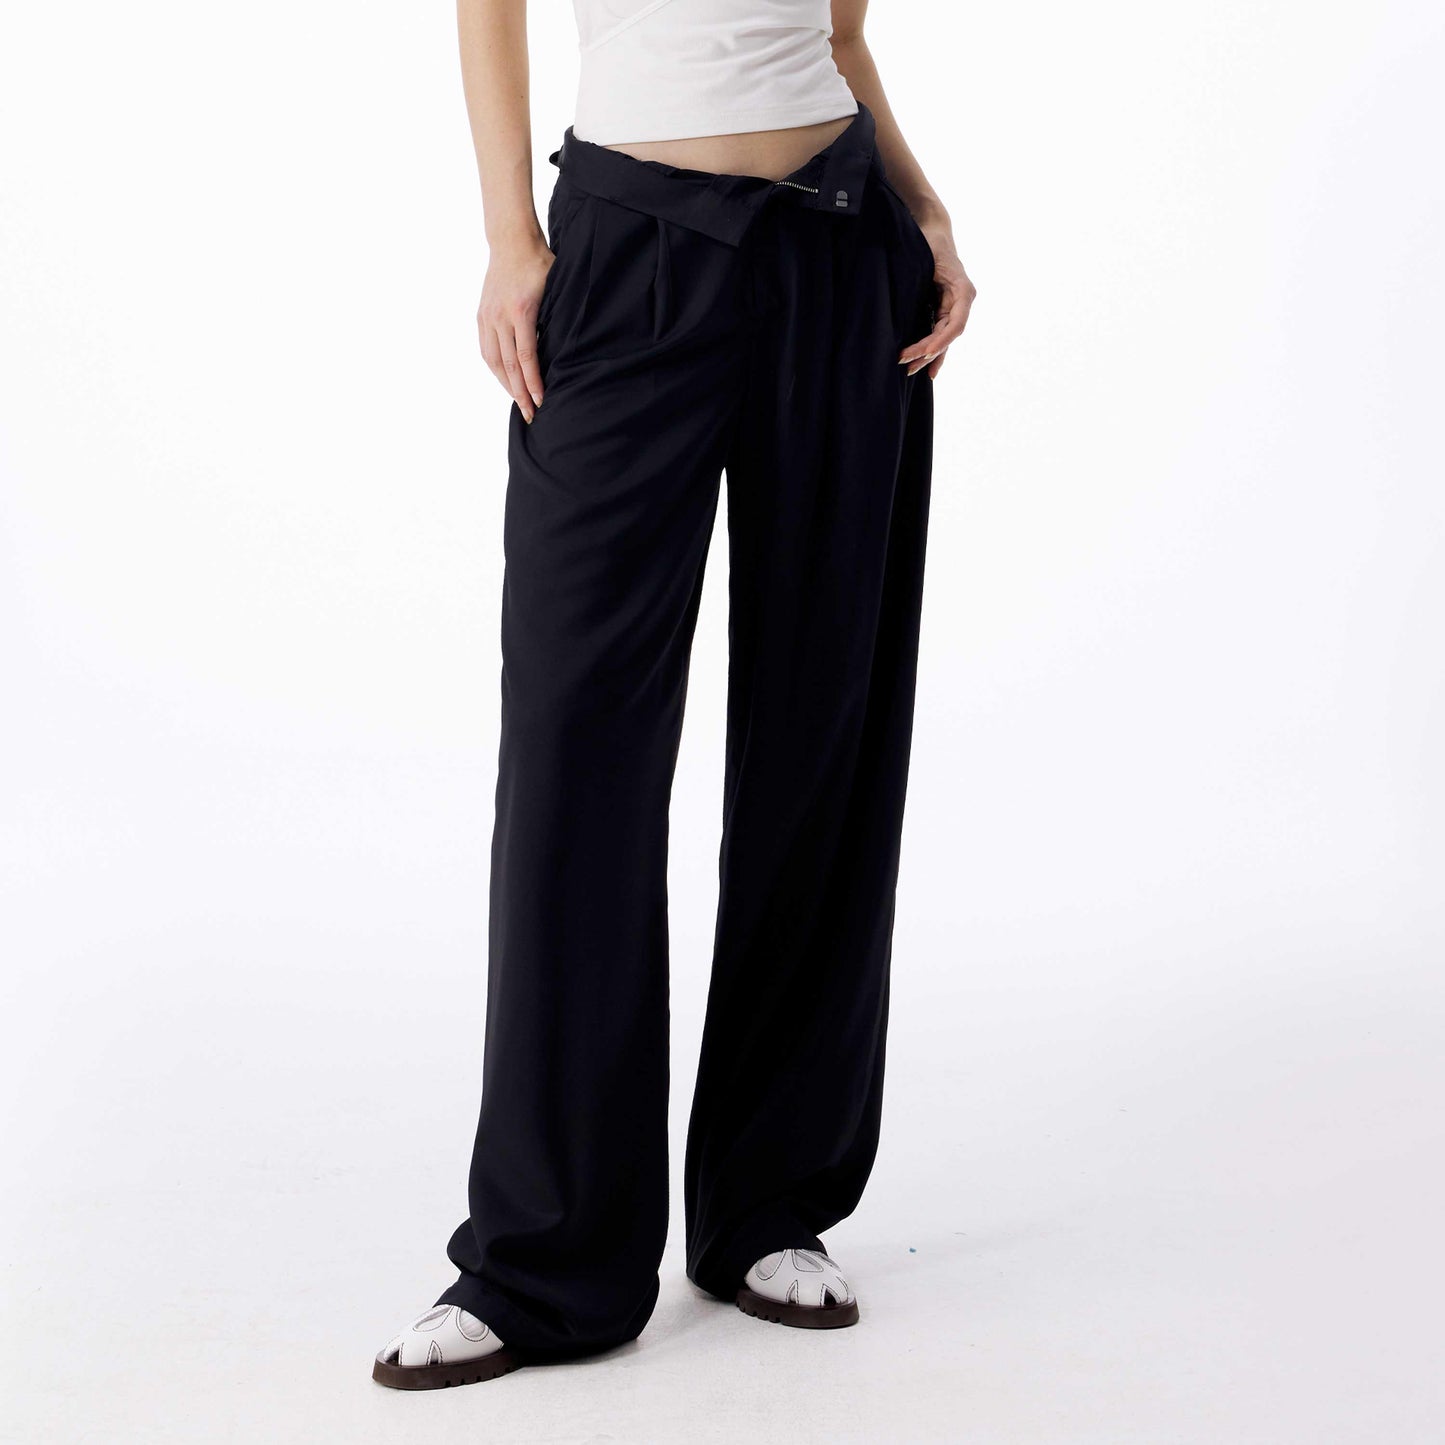 NUTH ‘Daily Needs’ Unisex Loose Trousers